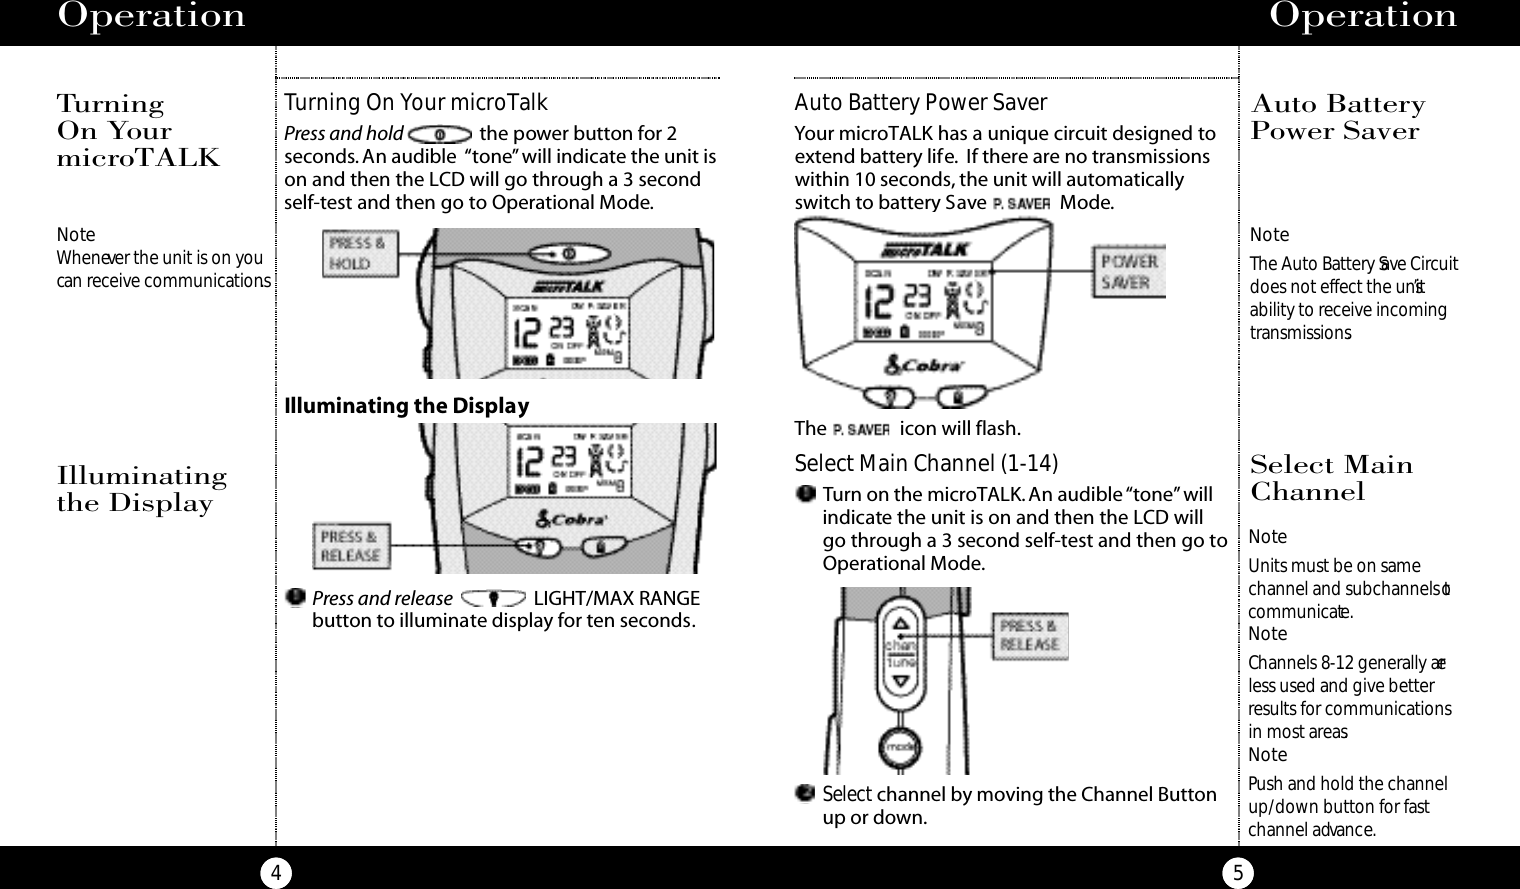 Turning On Your microTalkPress and hold the power button for 2seconds. An audible  “tone”will indicate the unit ison and then the LCD will go through a 3 secondself-test and then go to Operational Mode.Operation5NoteWhenever the unit is on youcan receive communications.Turning On YourmicroTALKOperation4NoteThe Auto Battery Save Circuitdoes not effect the unit’sability to receive incomingtransmissions.Auto Battery Power SaverYour microTALK has a unique circuit designed toextend battery life. If there are no transmissionswithin 10 seconds, the unit will automaticallyswitch to battery Save Mode.The icon will flash.Auto BatteryPower SaverIlluminating the DisplayIlluminatingthe DisplayPress and release LIGHT/MAX RANGEbutton to illuminate display for ten seconds.NoteUnits must be on same channel and subchannels tocommunicate.NoteChannels 8-12 generally areless used and give betterresults for communicationsin most areas.NotePush and hold the channelup/down button for fastchannel advance.Select MainChannel Select Main Channel (1-14)Turn on the microTALK. An audible “tone”willindicate the unit is on and then the LCD willgo through a 3 second self-test and then go toOperational Mode.Select channel by moving the Channel Buttonup or down.